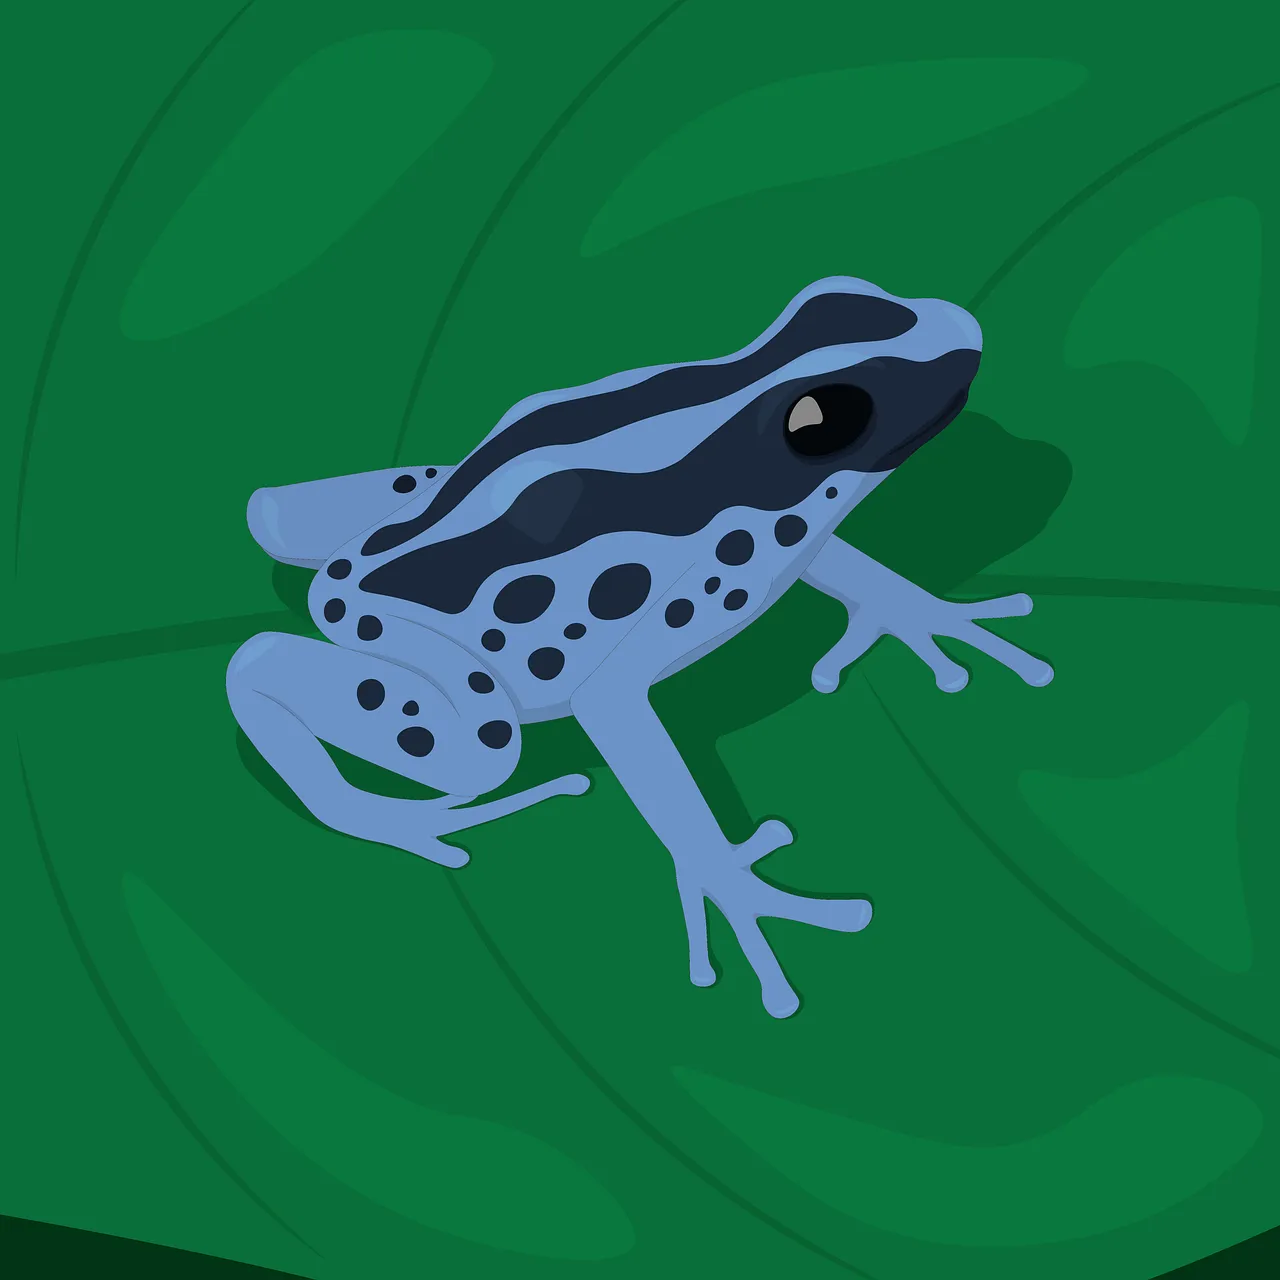 frog-7211336_1280.png